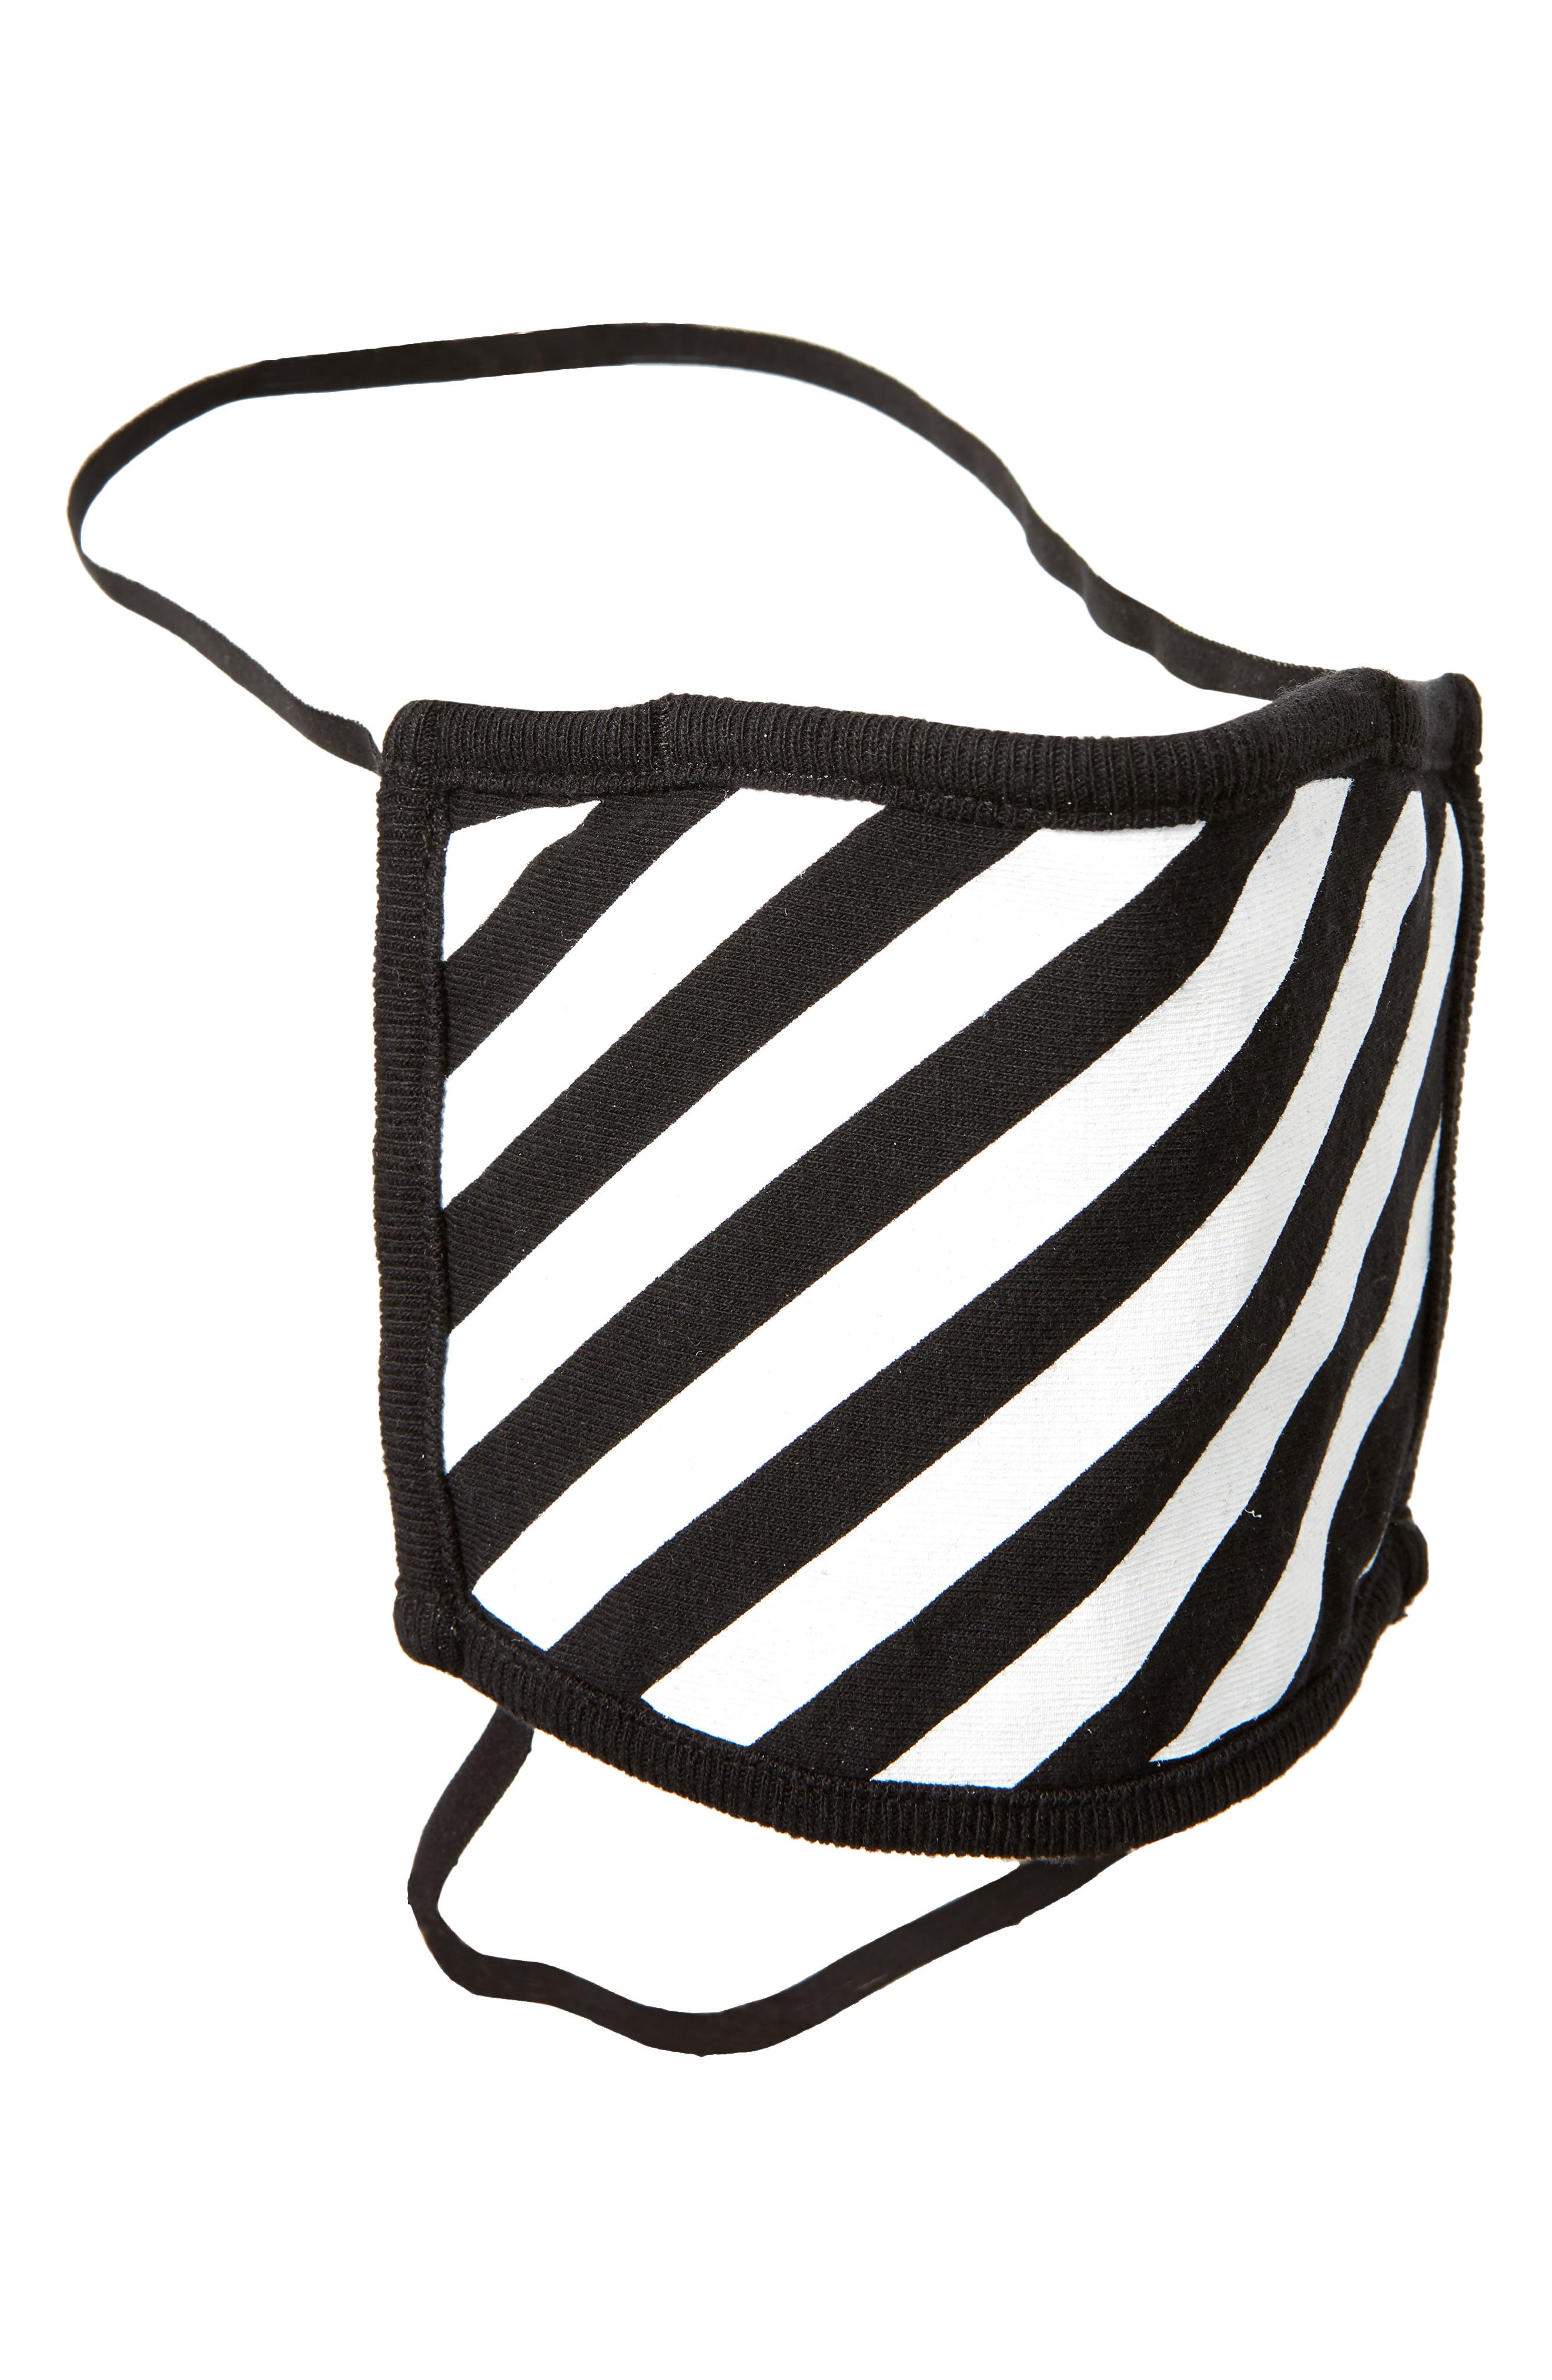 Off-White Diags Adult Cotton Knit Face Mask in Black White at Nordstrom